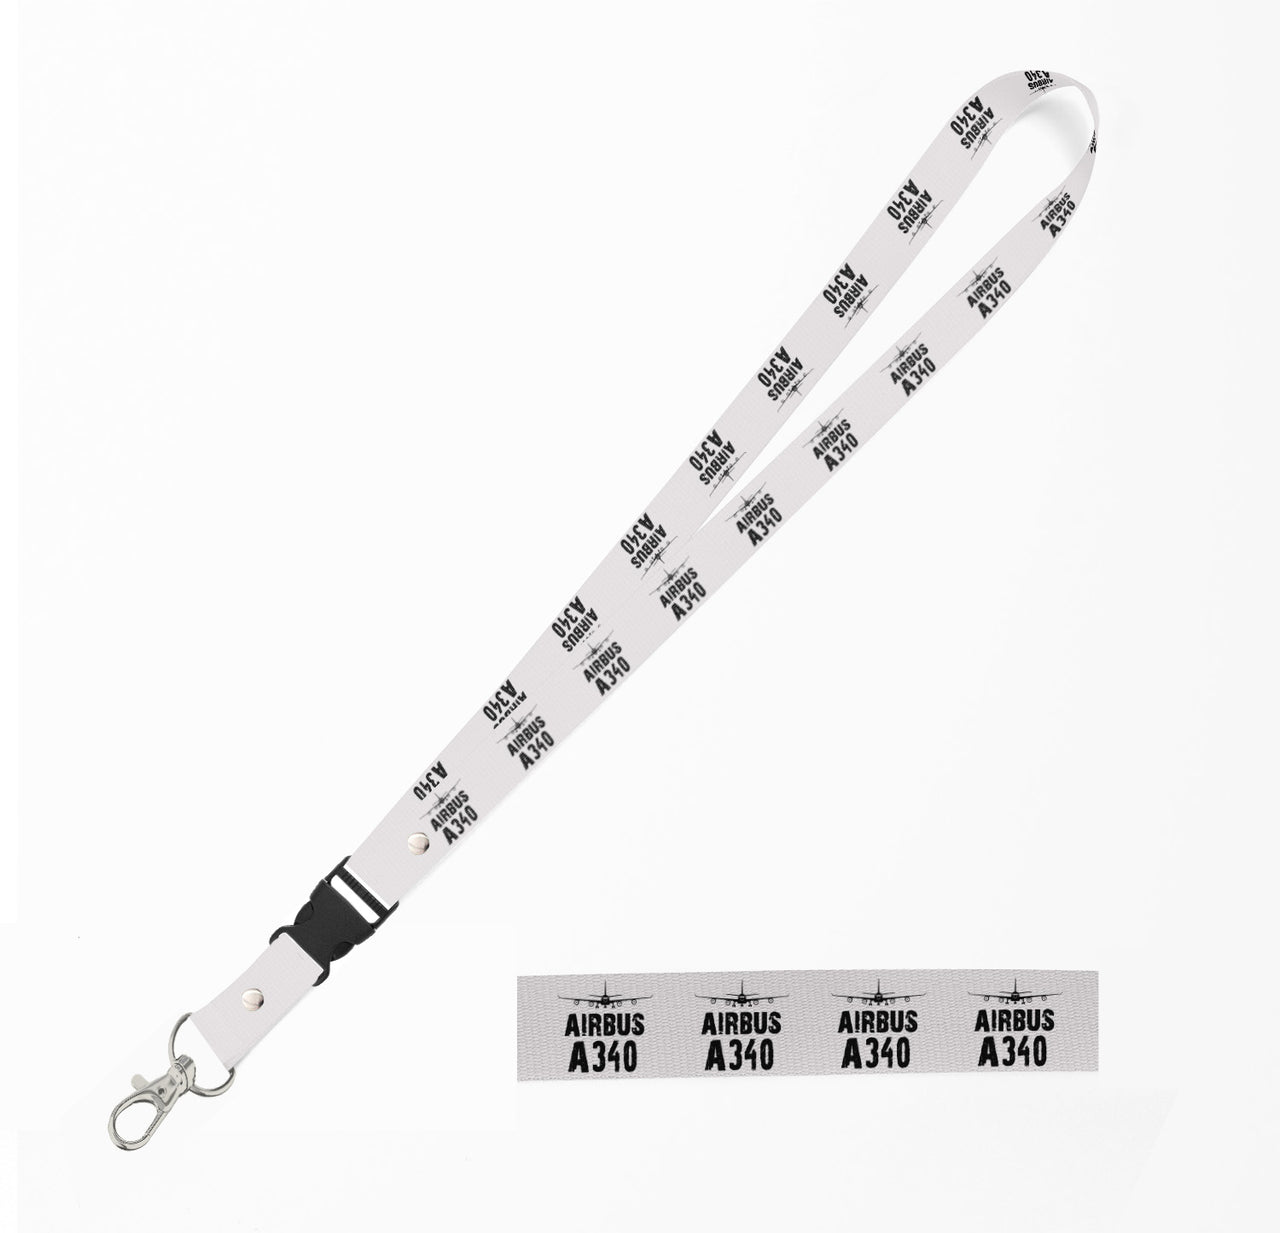 Airbus A340 & Plane Designed Detachable Lanyard & ID Holders